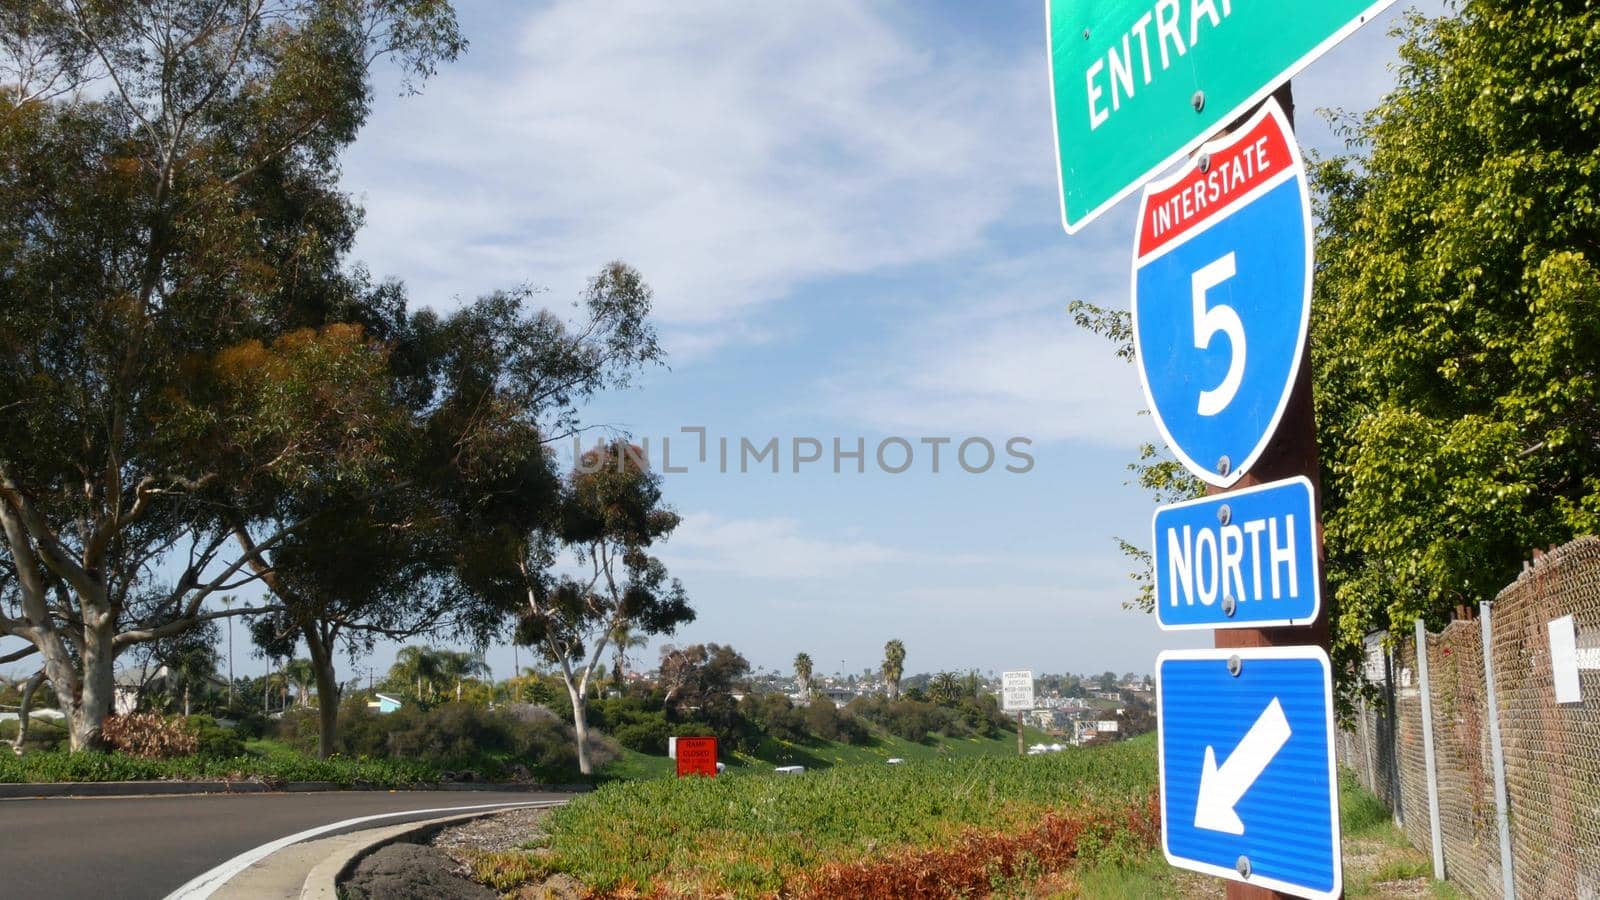 Freeway entrance, information sign on crossraod in USA. Route to Los Angeles, California. Interstate highway 5 signpost as symbol of road trip, transportation and traffic safety rules and regulations by DogoraSun